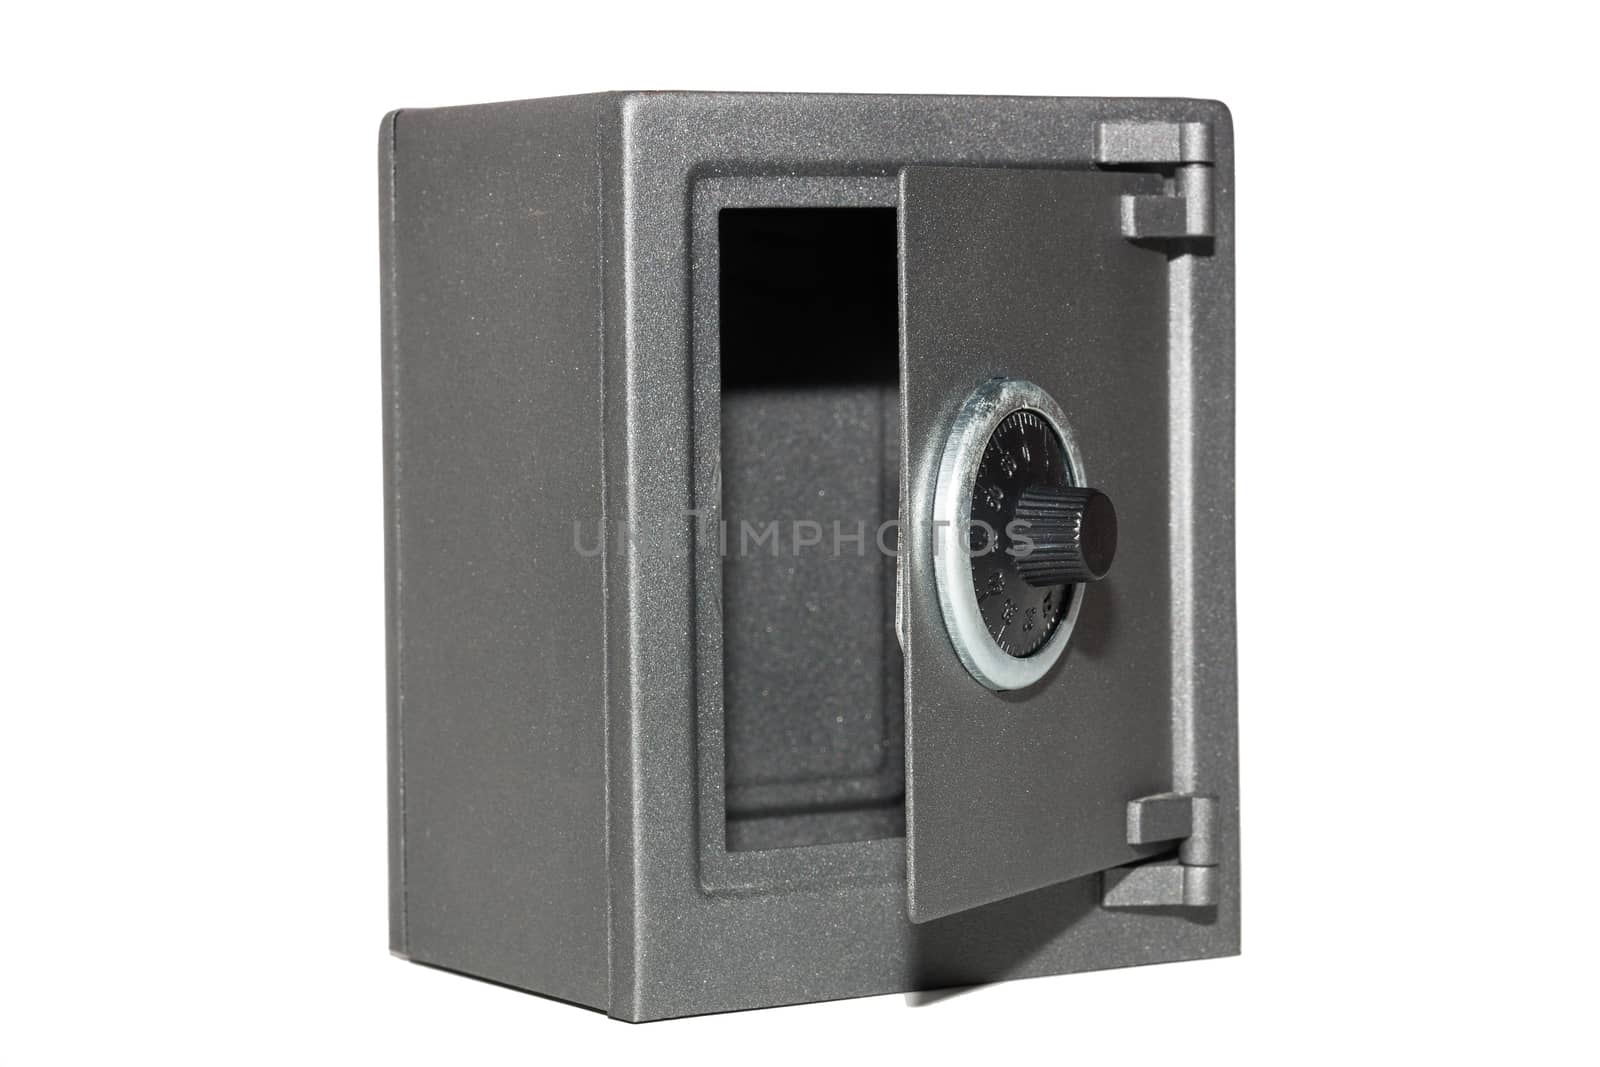 The photo depicts the safe on a white background